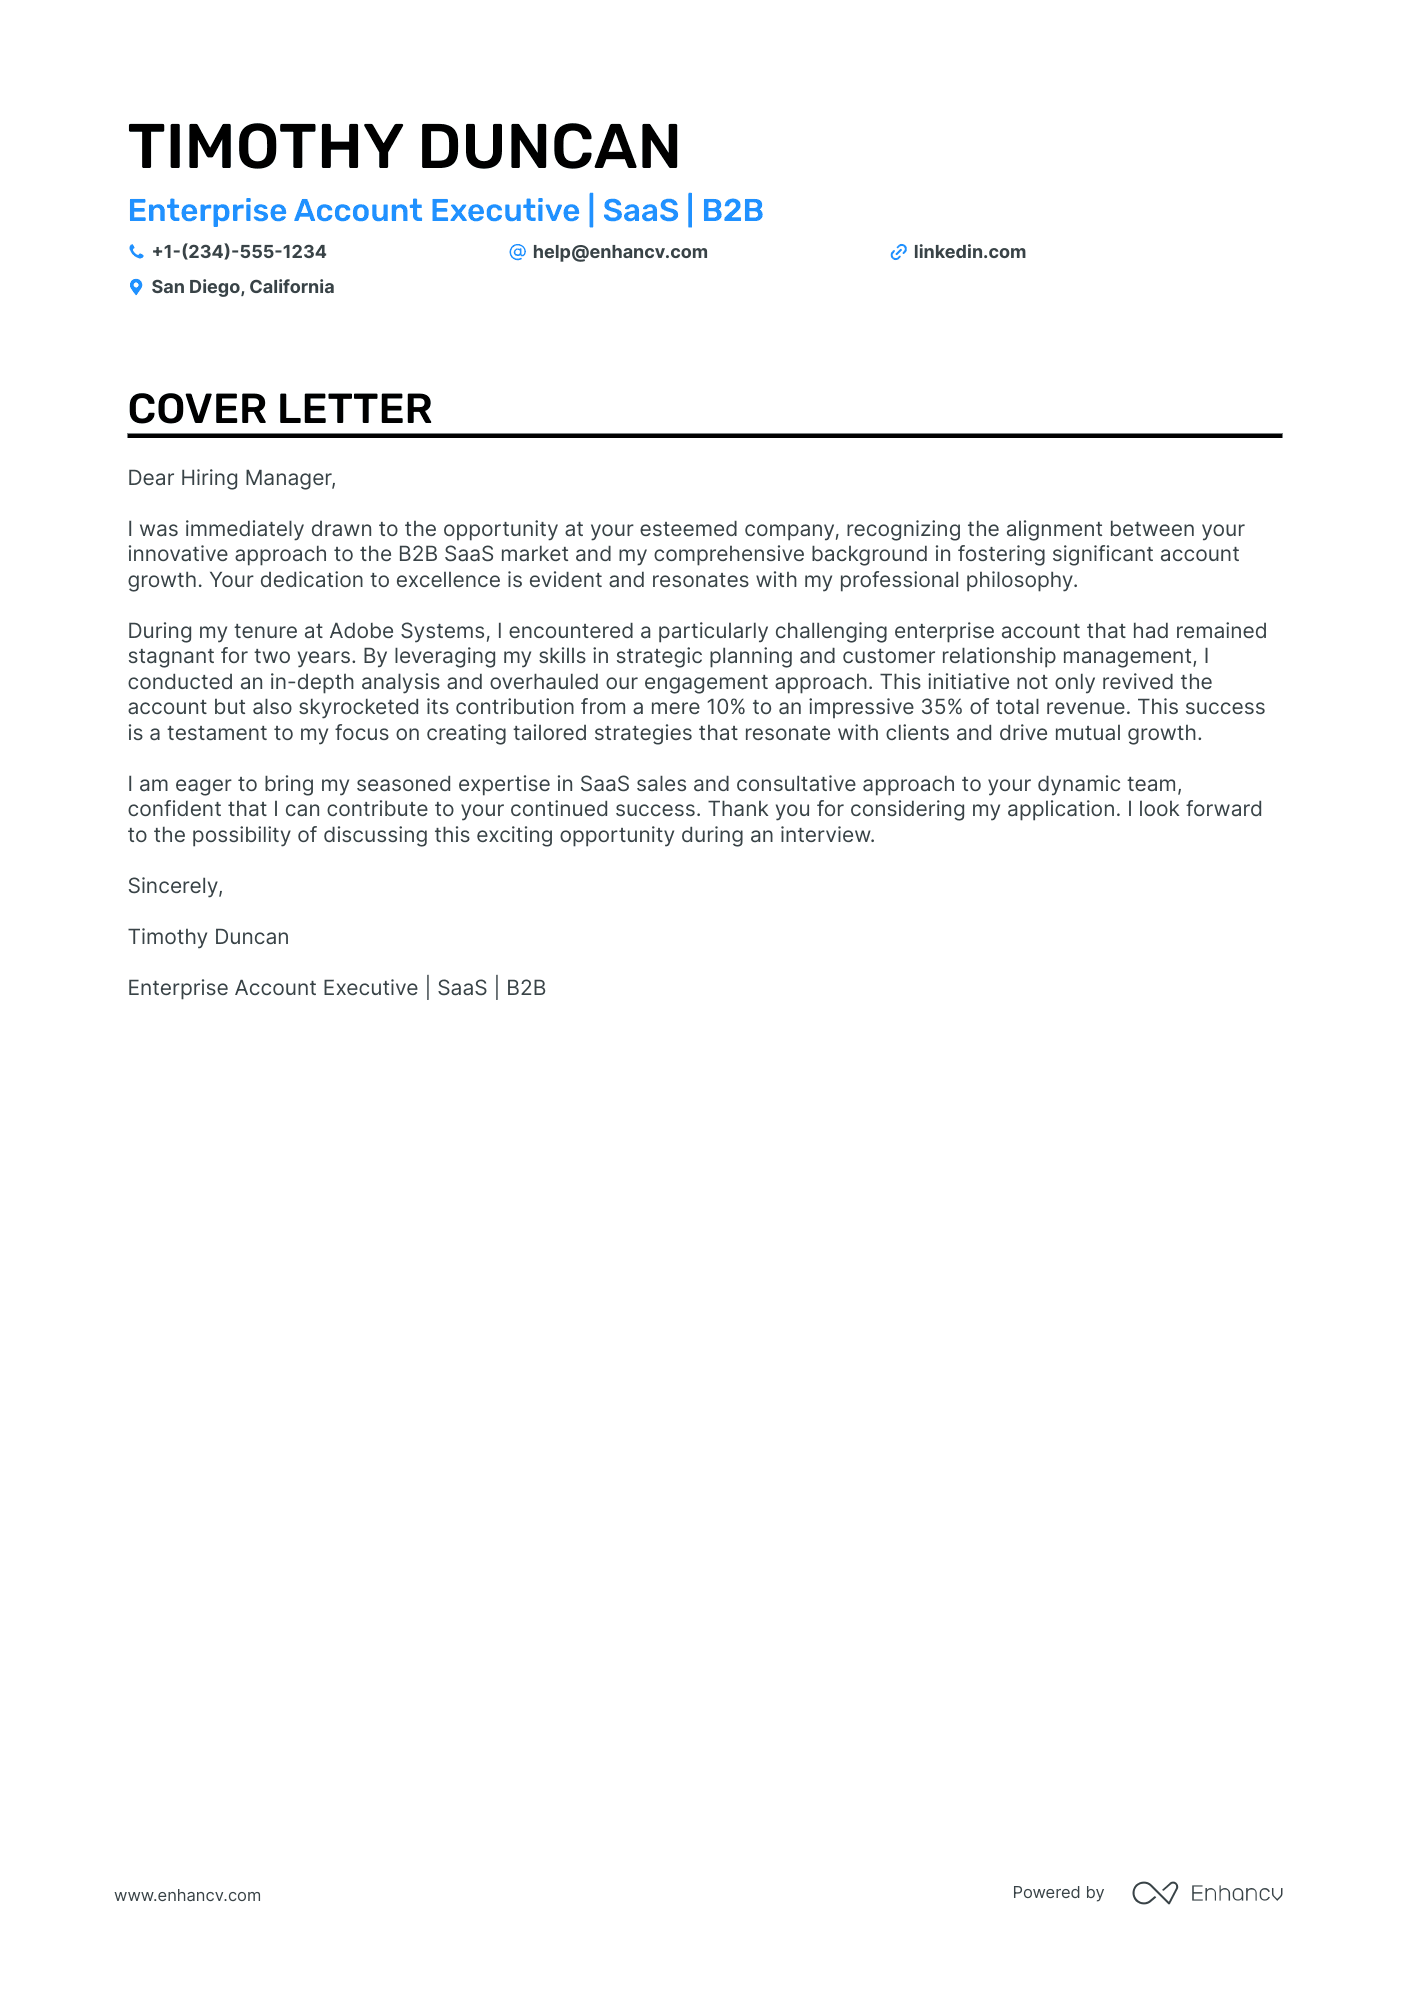 cover letter for account executive job application